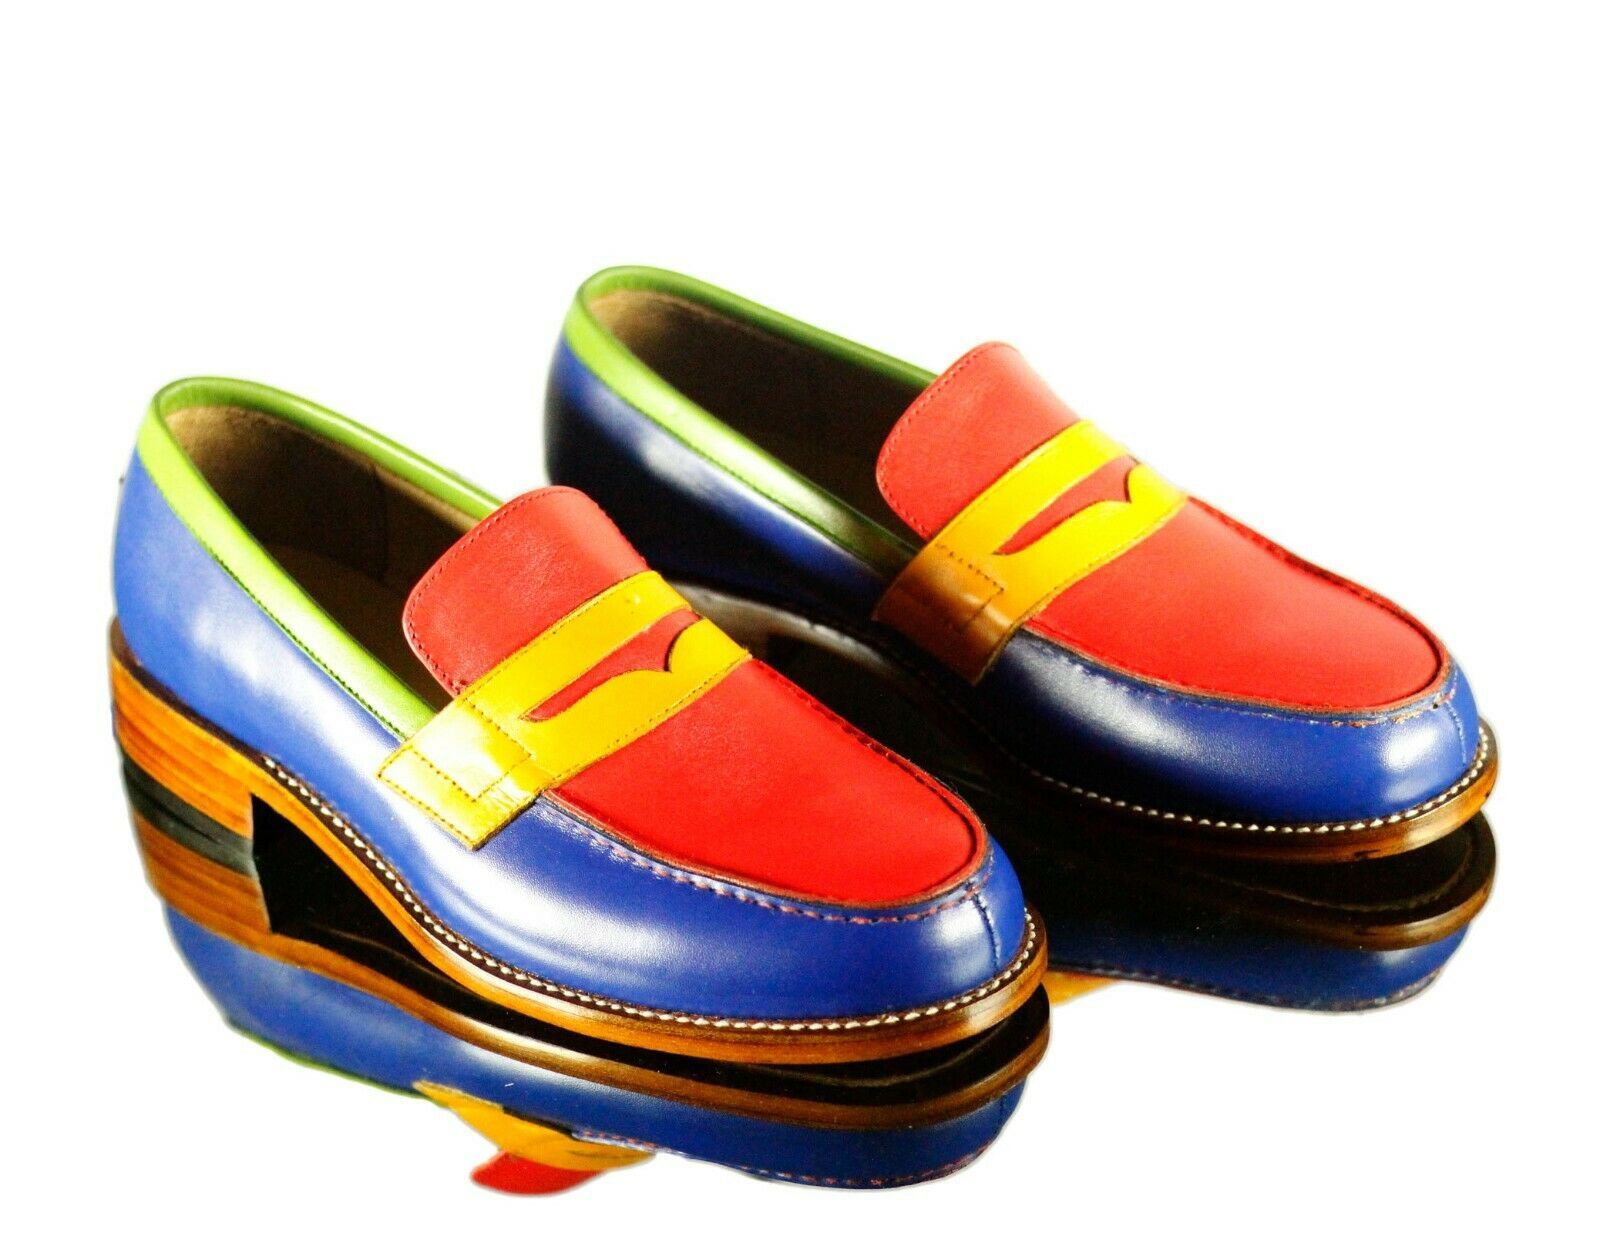 Handmade Men Multicolor Leather Slipper Party Penny Loafers, Dress Moccasin Shoe